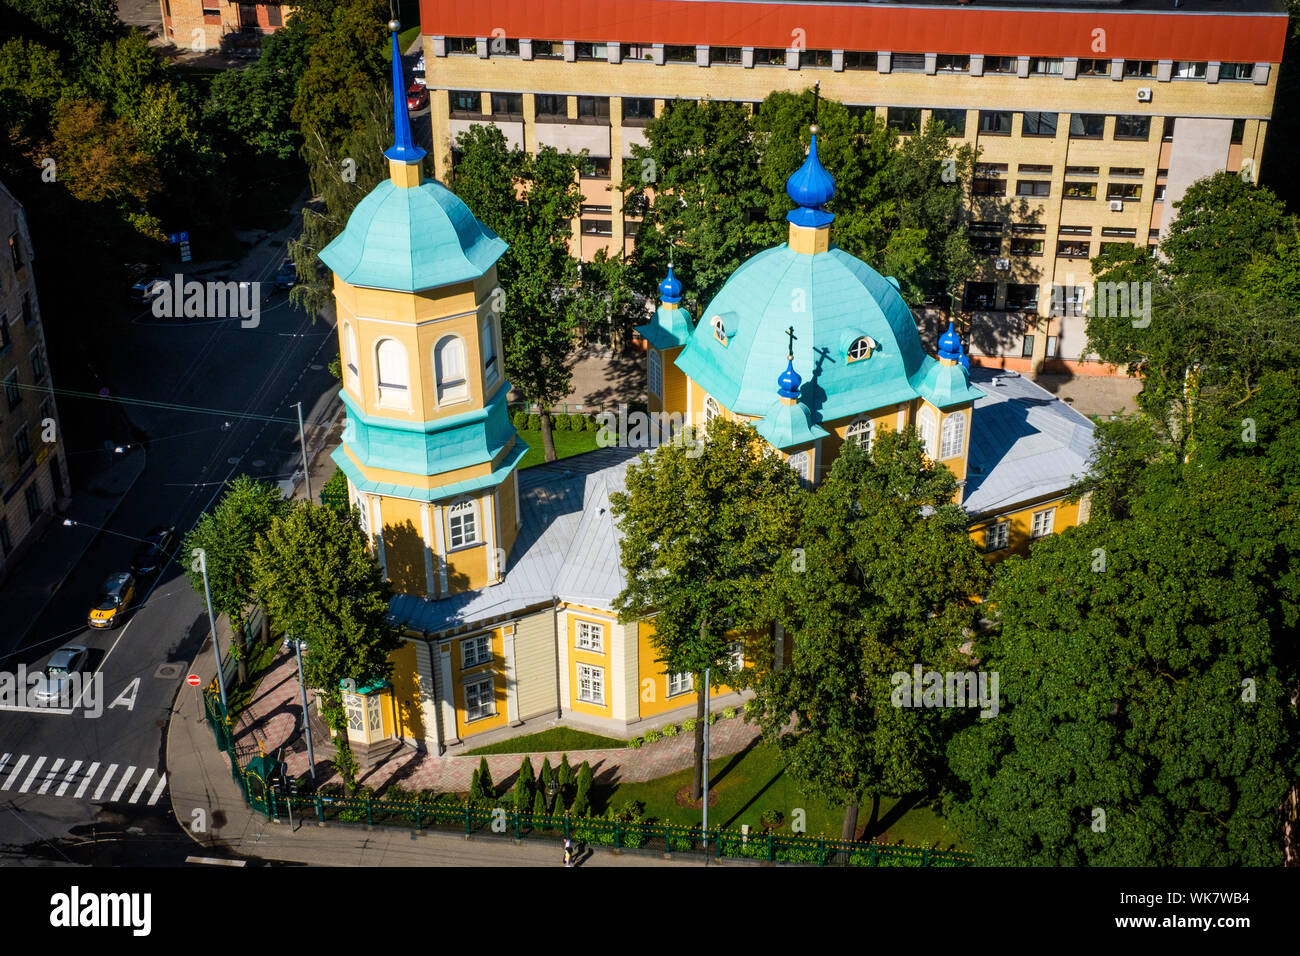 Latvia: Riga.  Annunciation of Our Most Holy Lady Church, an Orthodox church situated at the corner of Gogo&;a Street and  Tourgueniev  Street in the Stock Photo